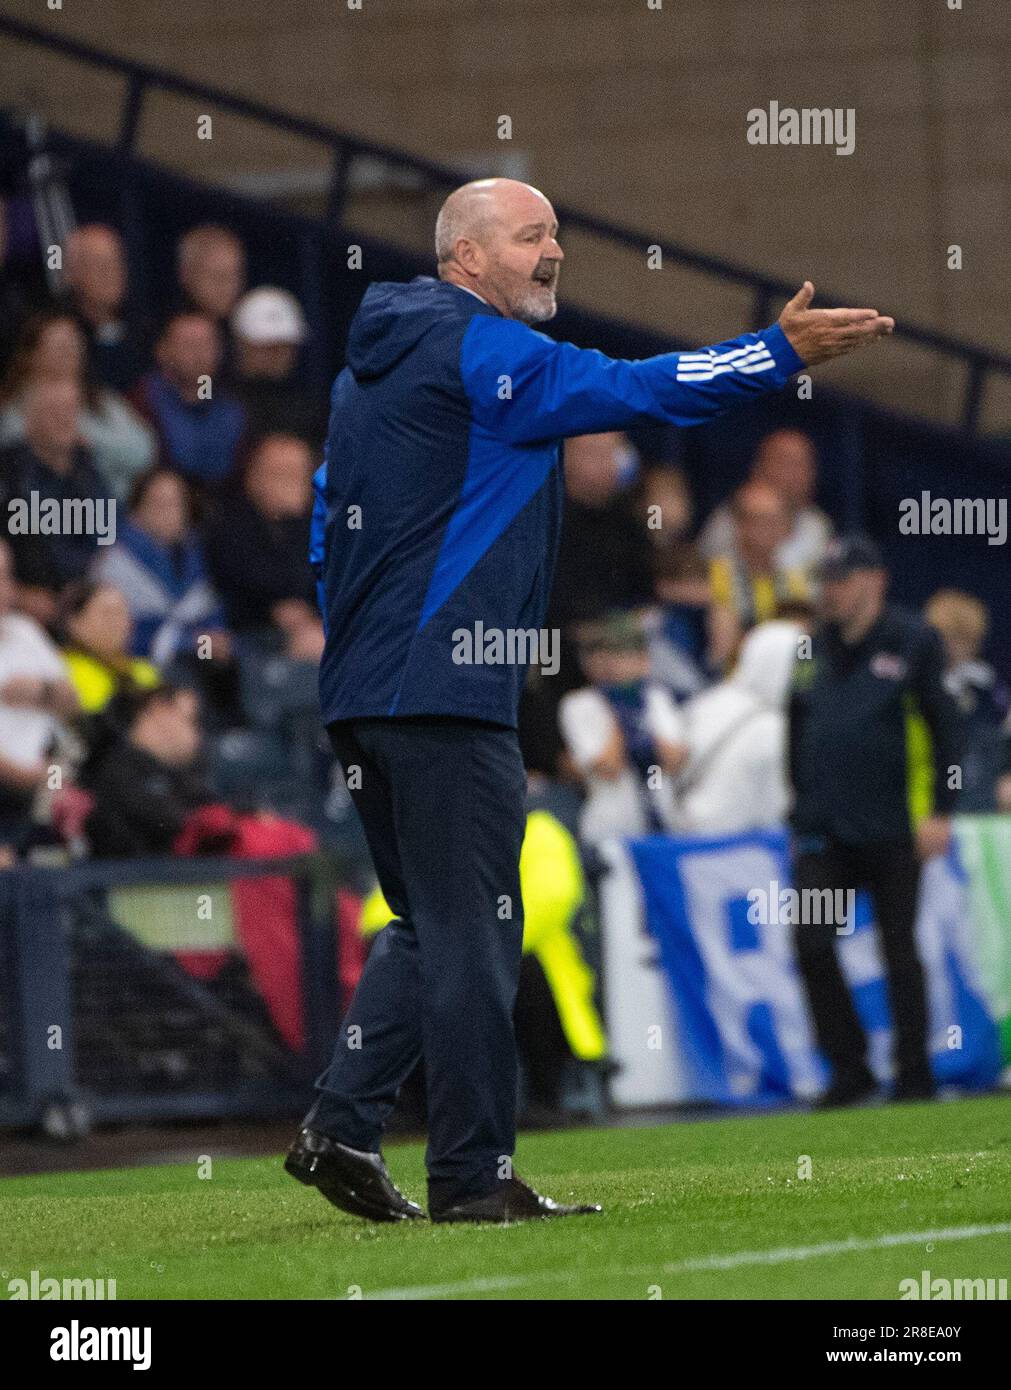 GLASGOW, SCOTLAND - JUNE 20: Scotland coach, Steve Clarke, during the UEFA EURO 2024 qualifying round group A match between Scotland and Georgia at Hampden Park on June 20, 2023 in Glasgow, Scotland. (Photo by Ian Jacobs/MB Media/) Stock Photo